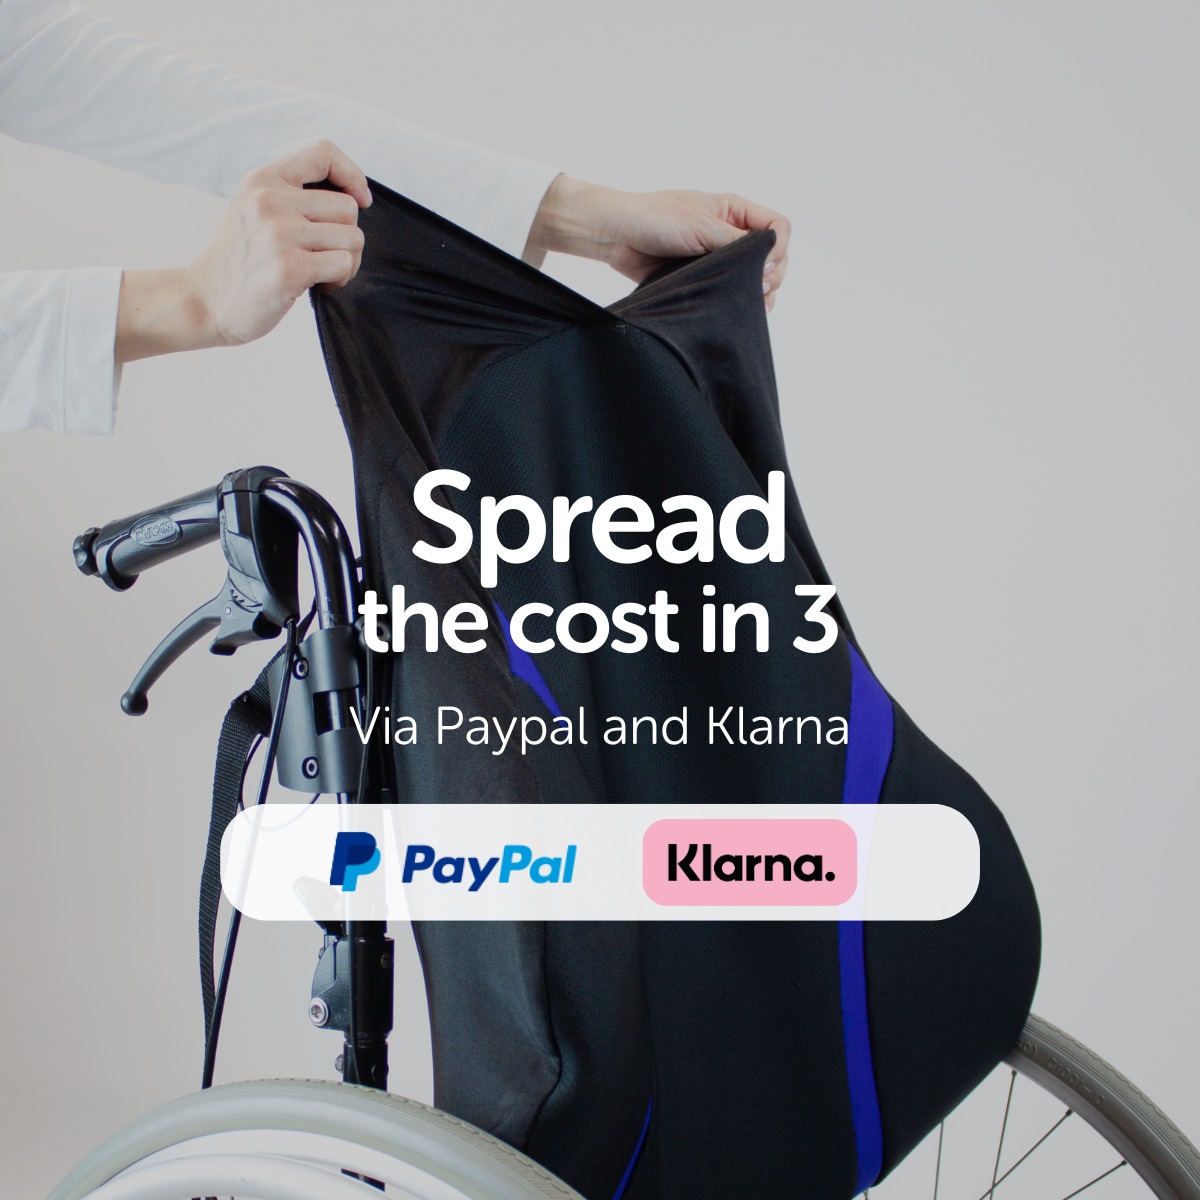 📢 ICYMI We offer spread the cost payment options on all three Aerseat configurations with PayPal or Klarna. You can also try it for FREE for 10 days with our Try-It Scheme Apply here: aergohealth.com/try-it